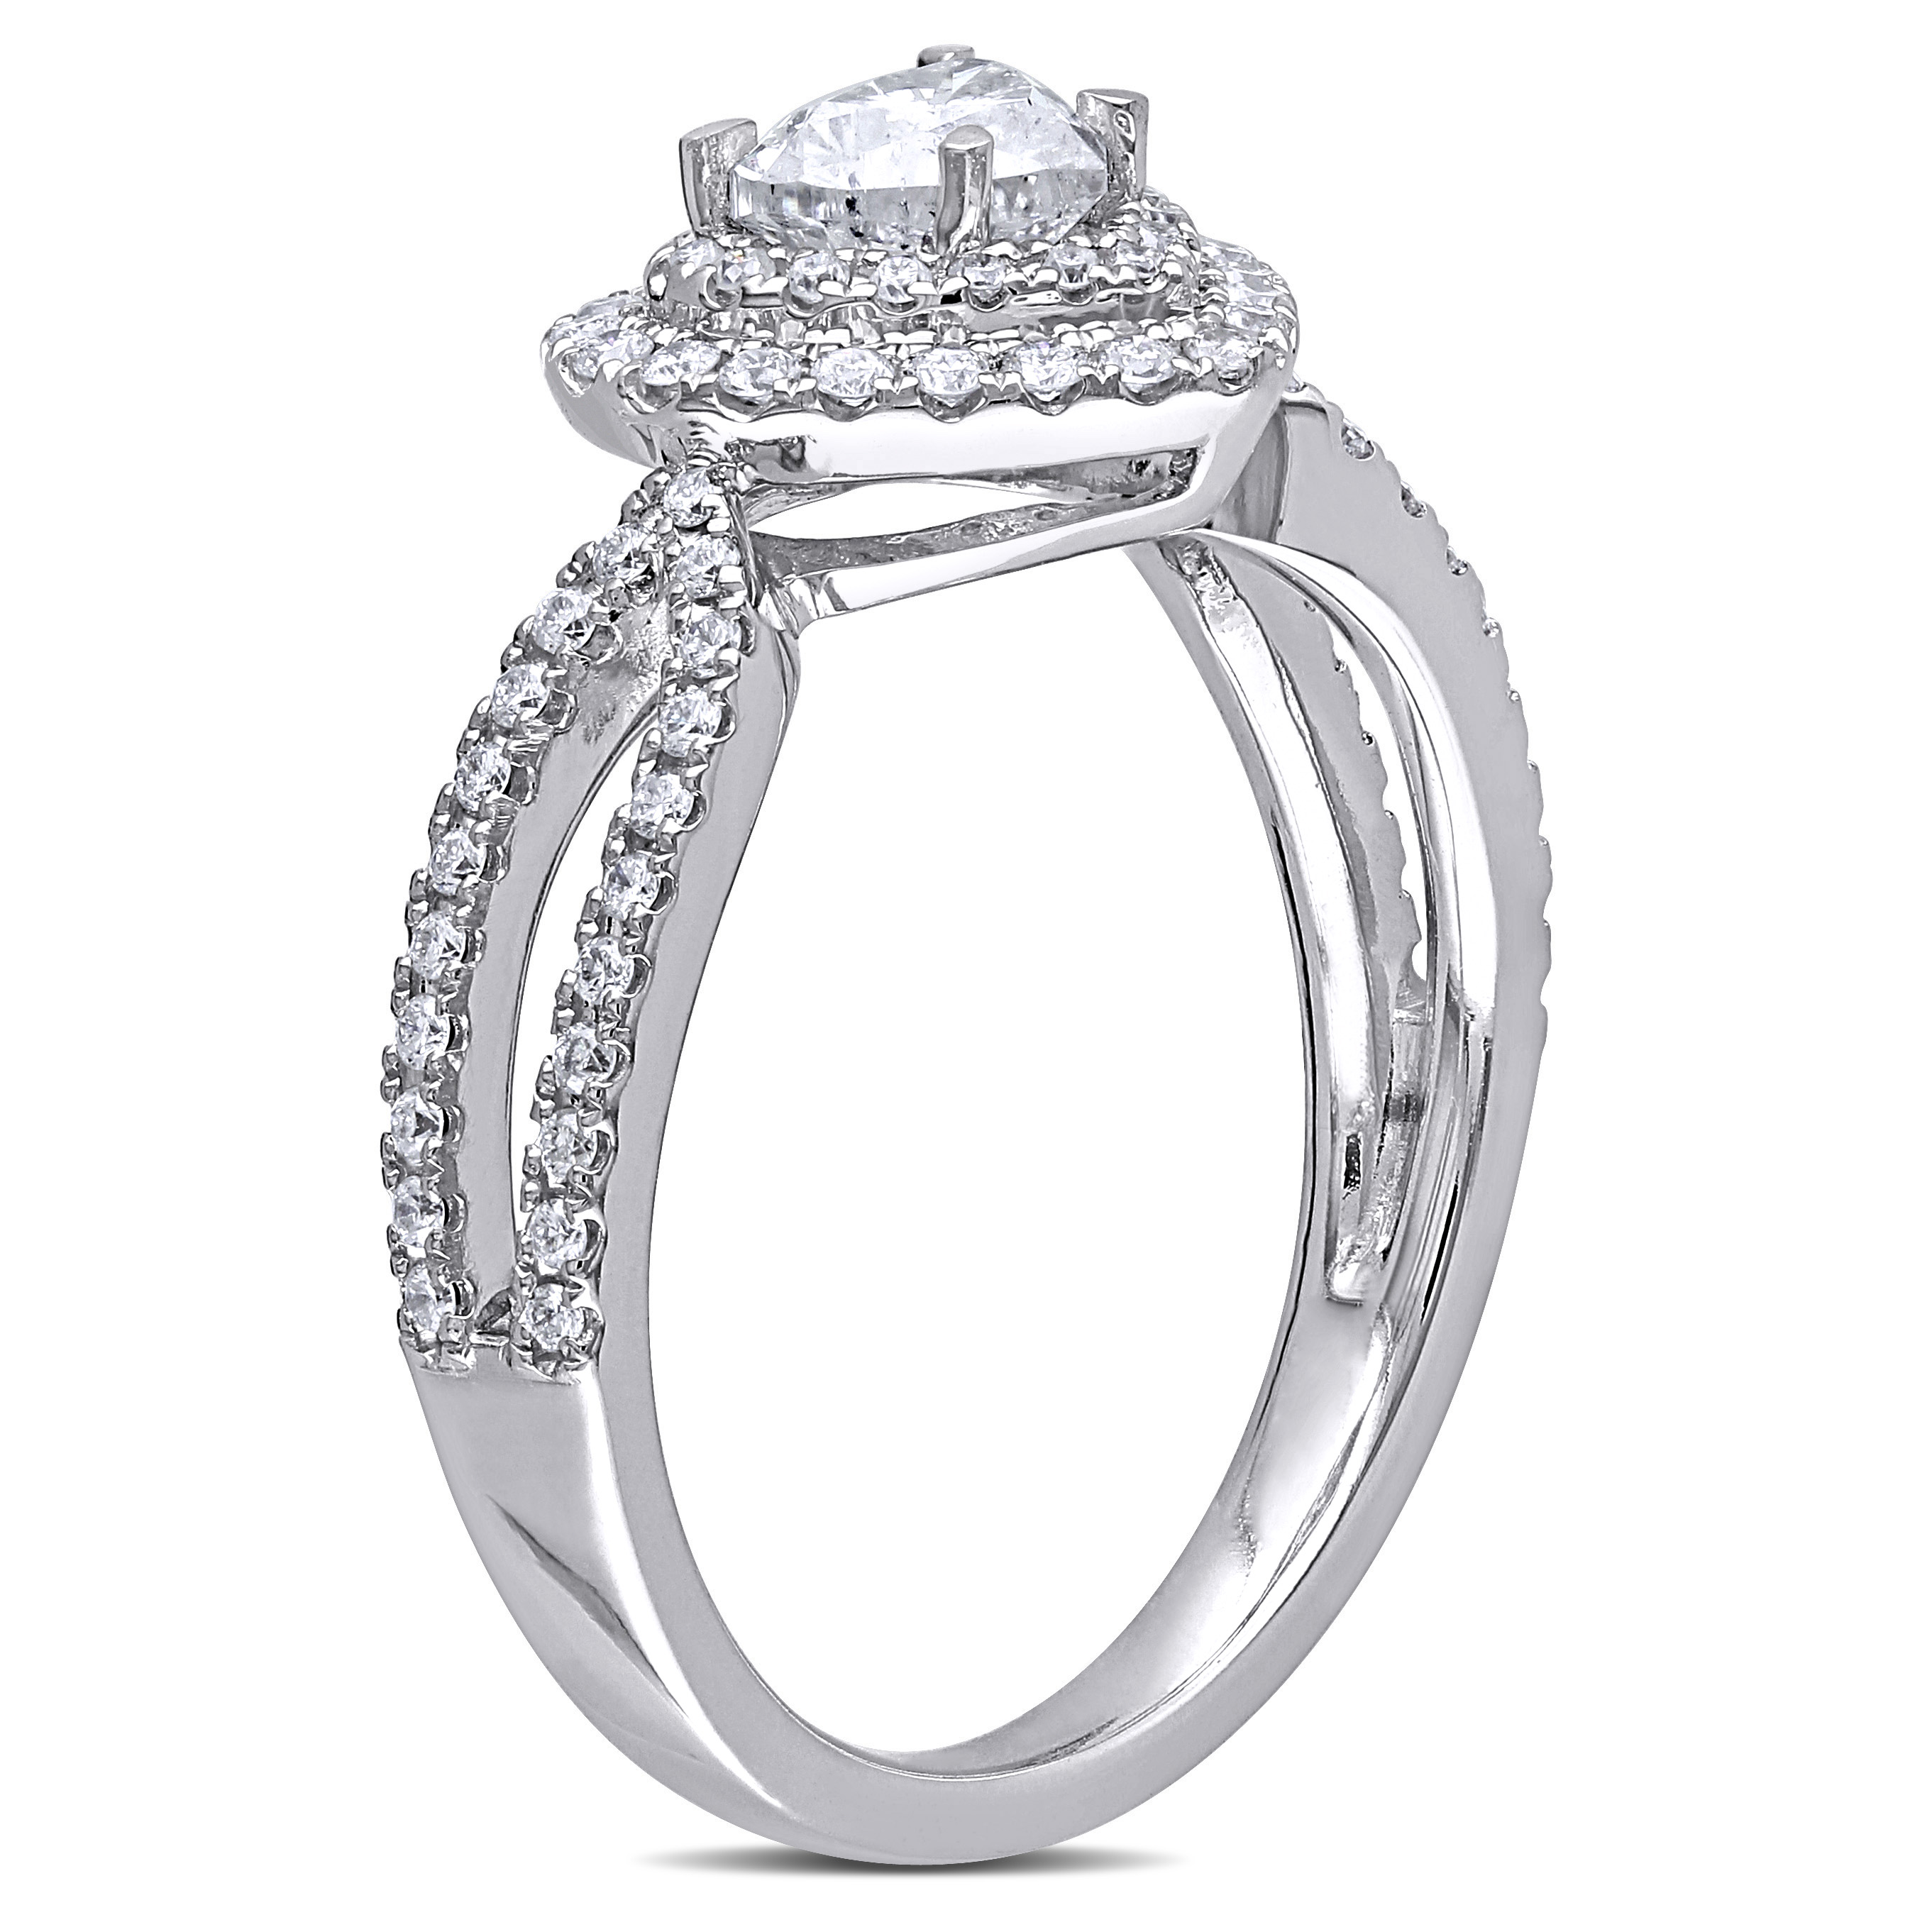 1 CT TW Double Halo Heart Diamond Engagement Ring in 14k White Gold